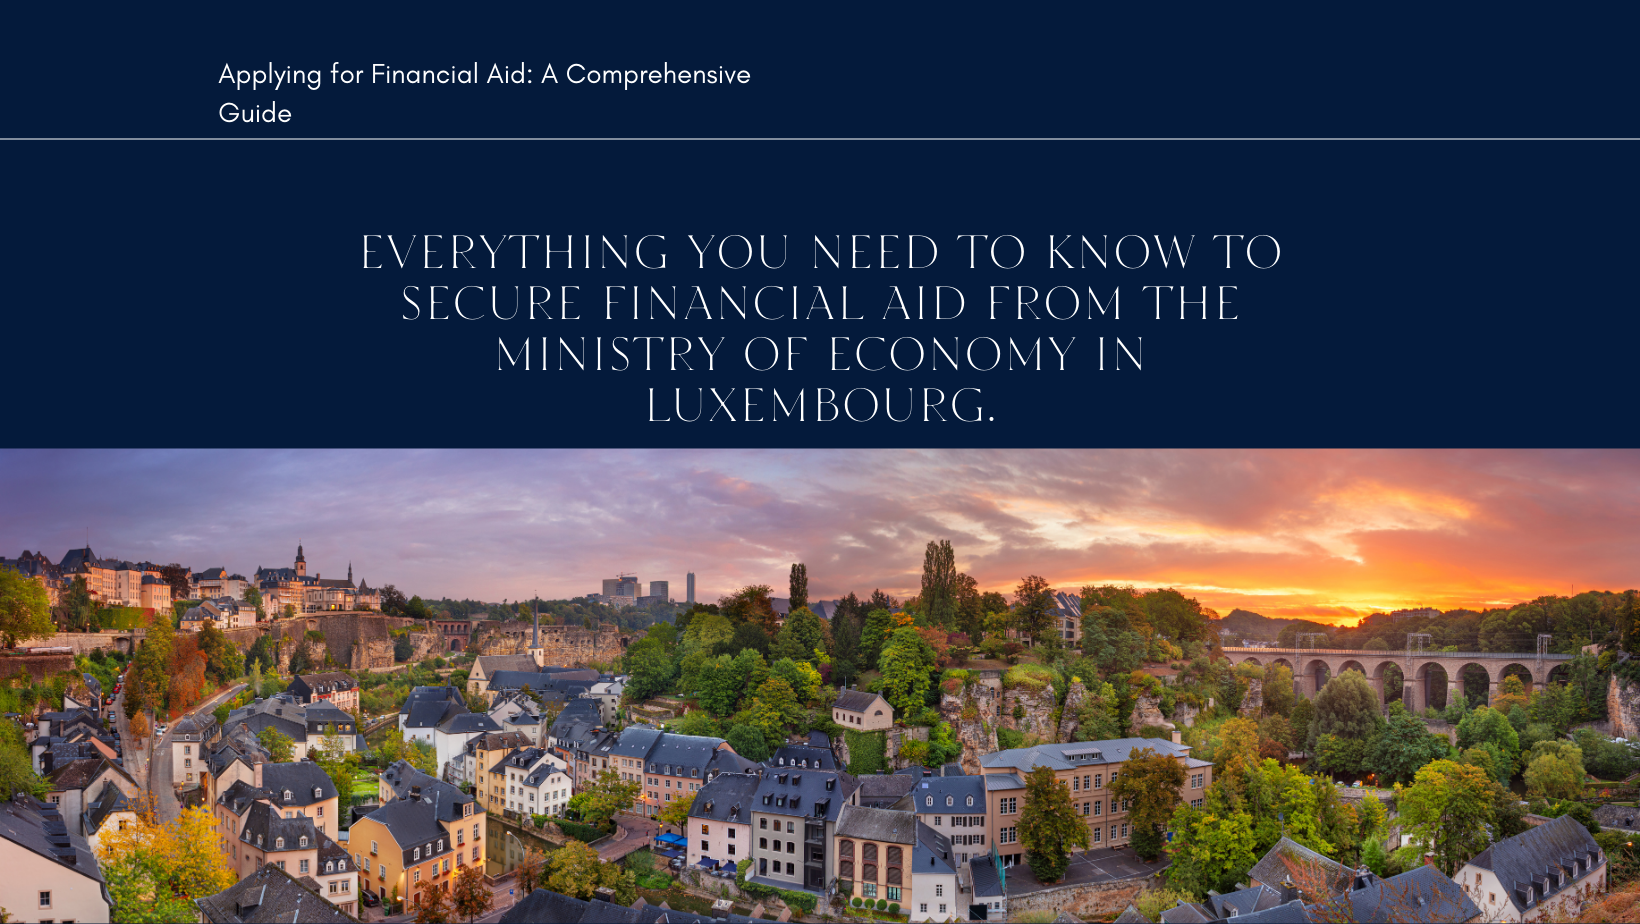 Guide to Applying for Financial Aid from the Ministry of the Economy in Luxembourg